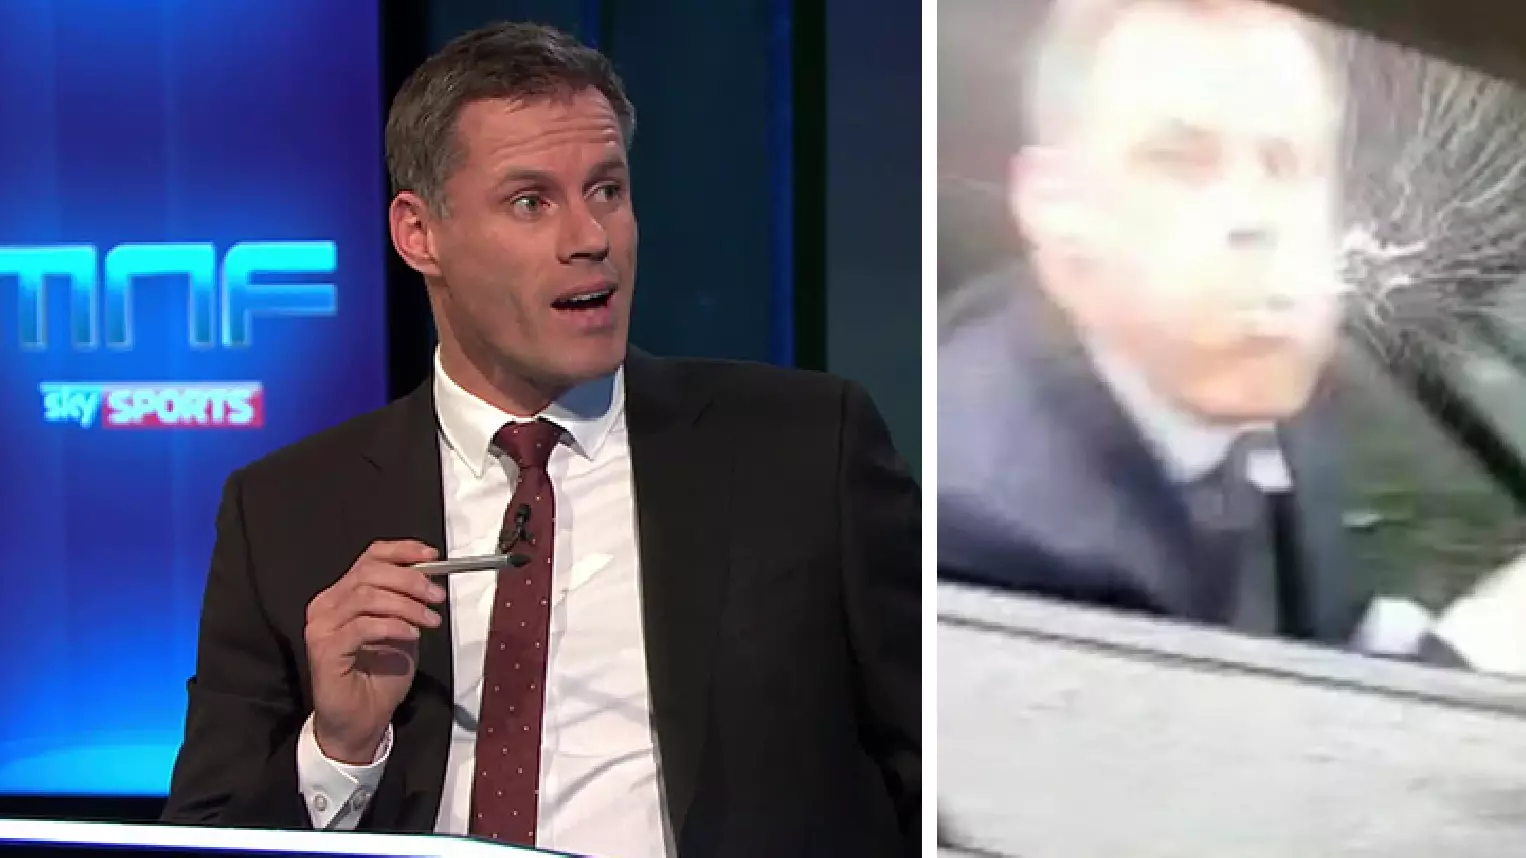 Jamie Carragher Won't Be Appearing On Monday Night Football Tonight